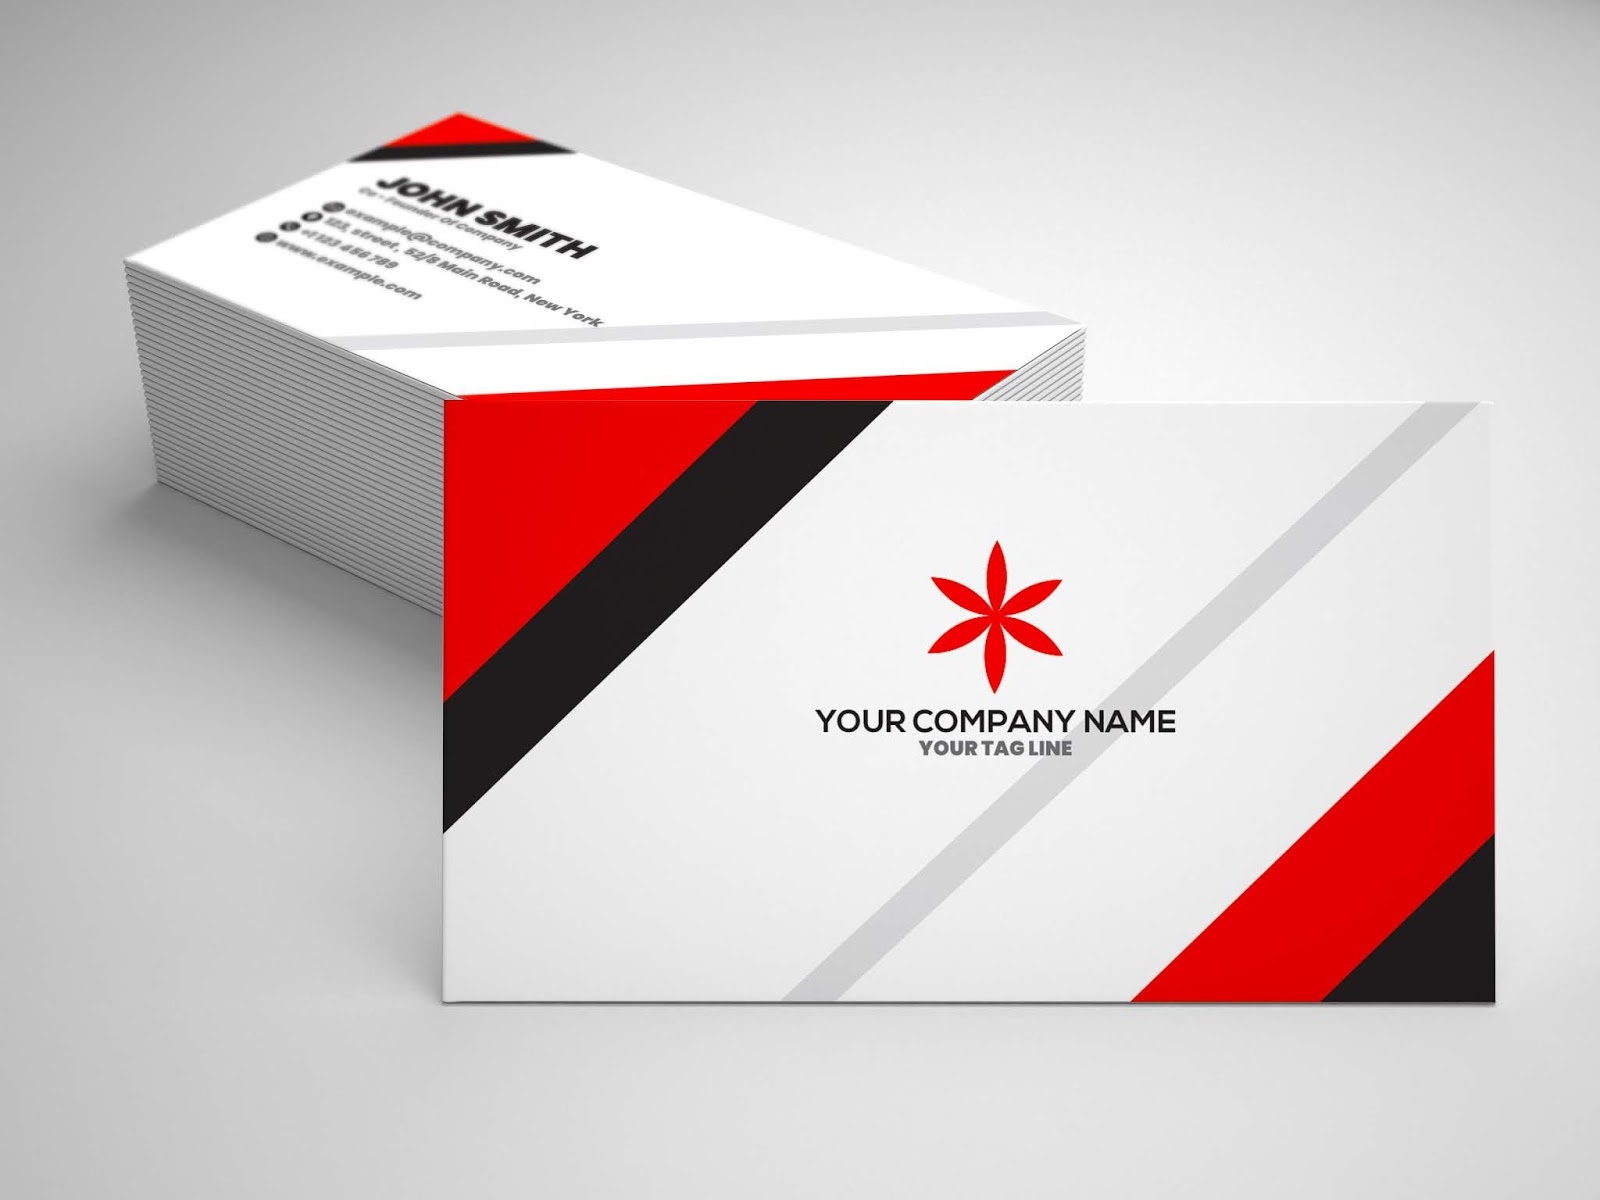 How To Make Double Sided Business Cards In Illustrator For Double Sided Business Card Template Illustrator